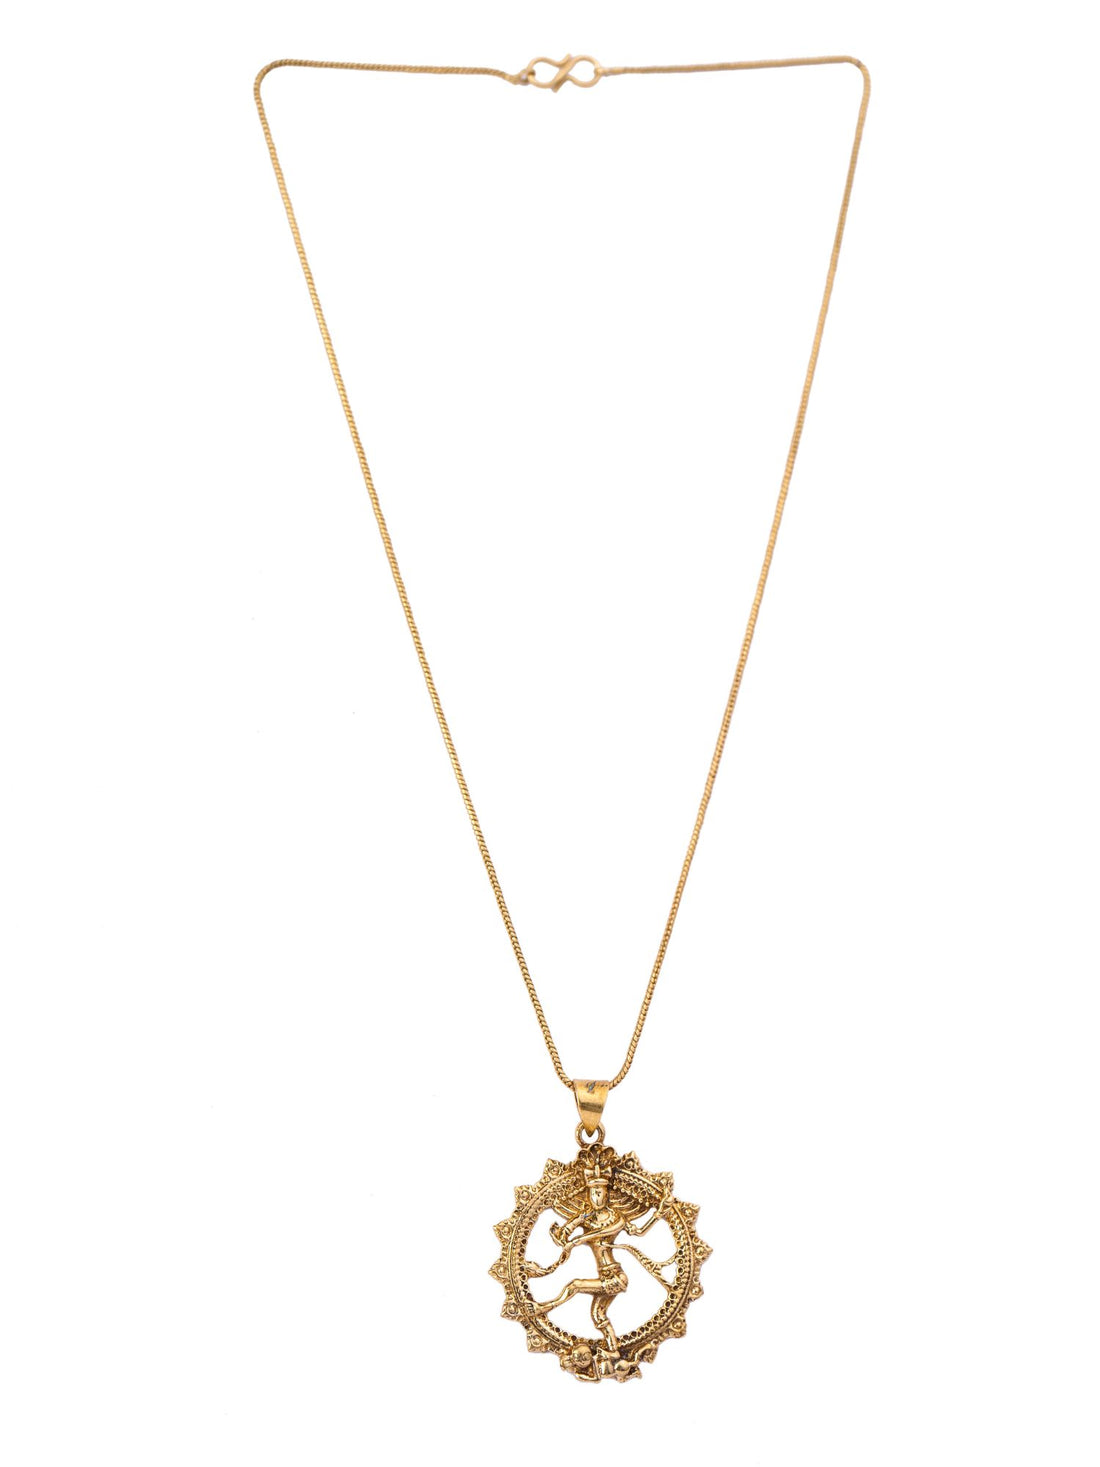 Contemporary Pendant With Chain By Studio One Love